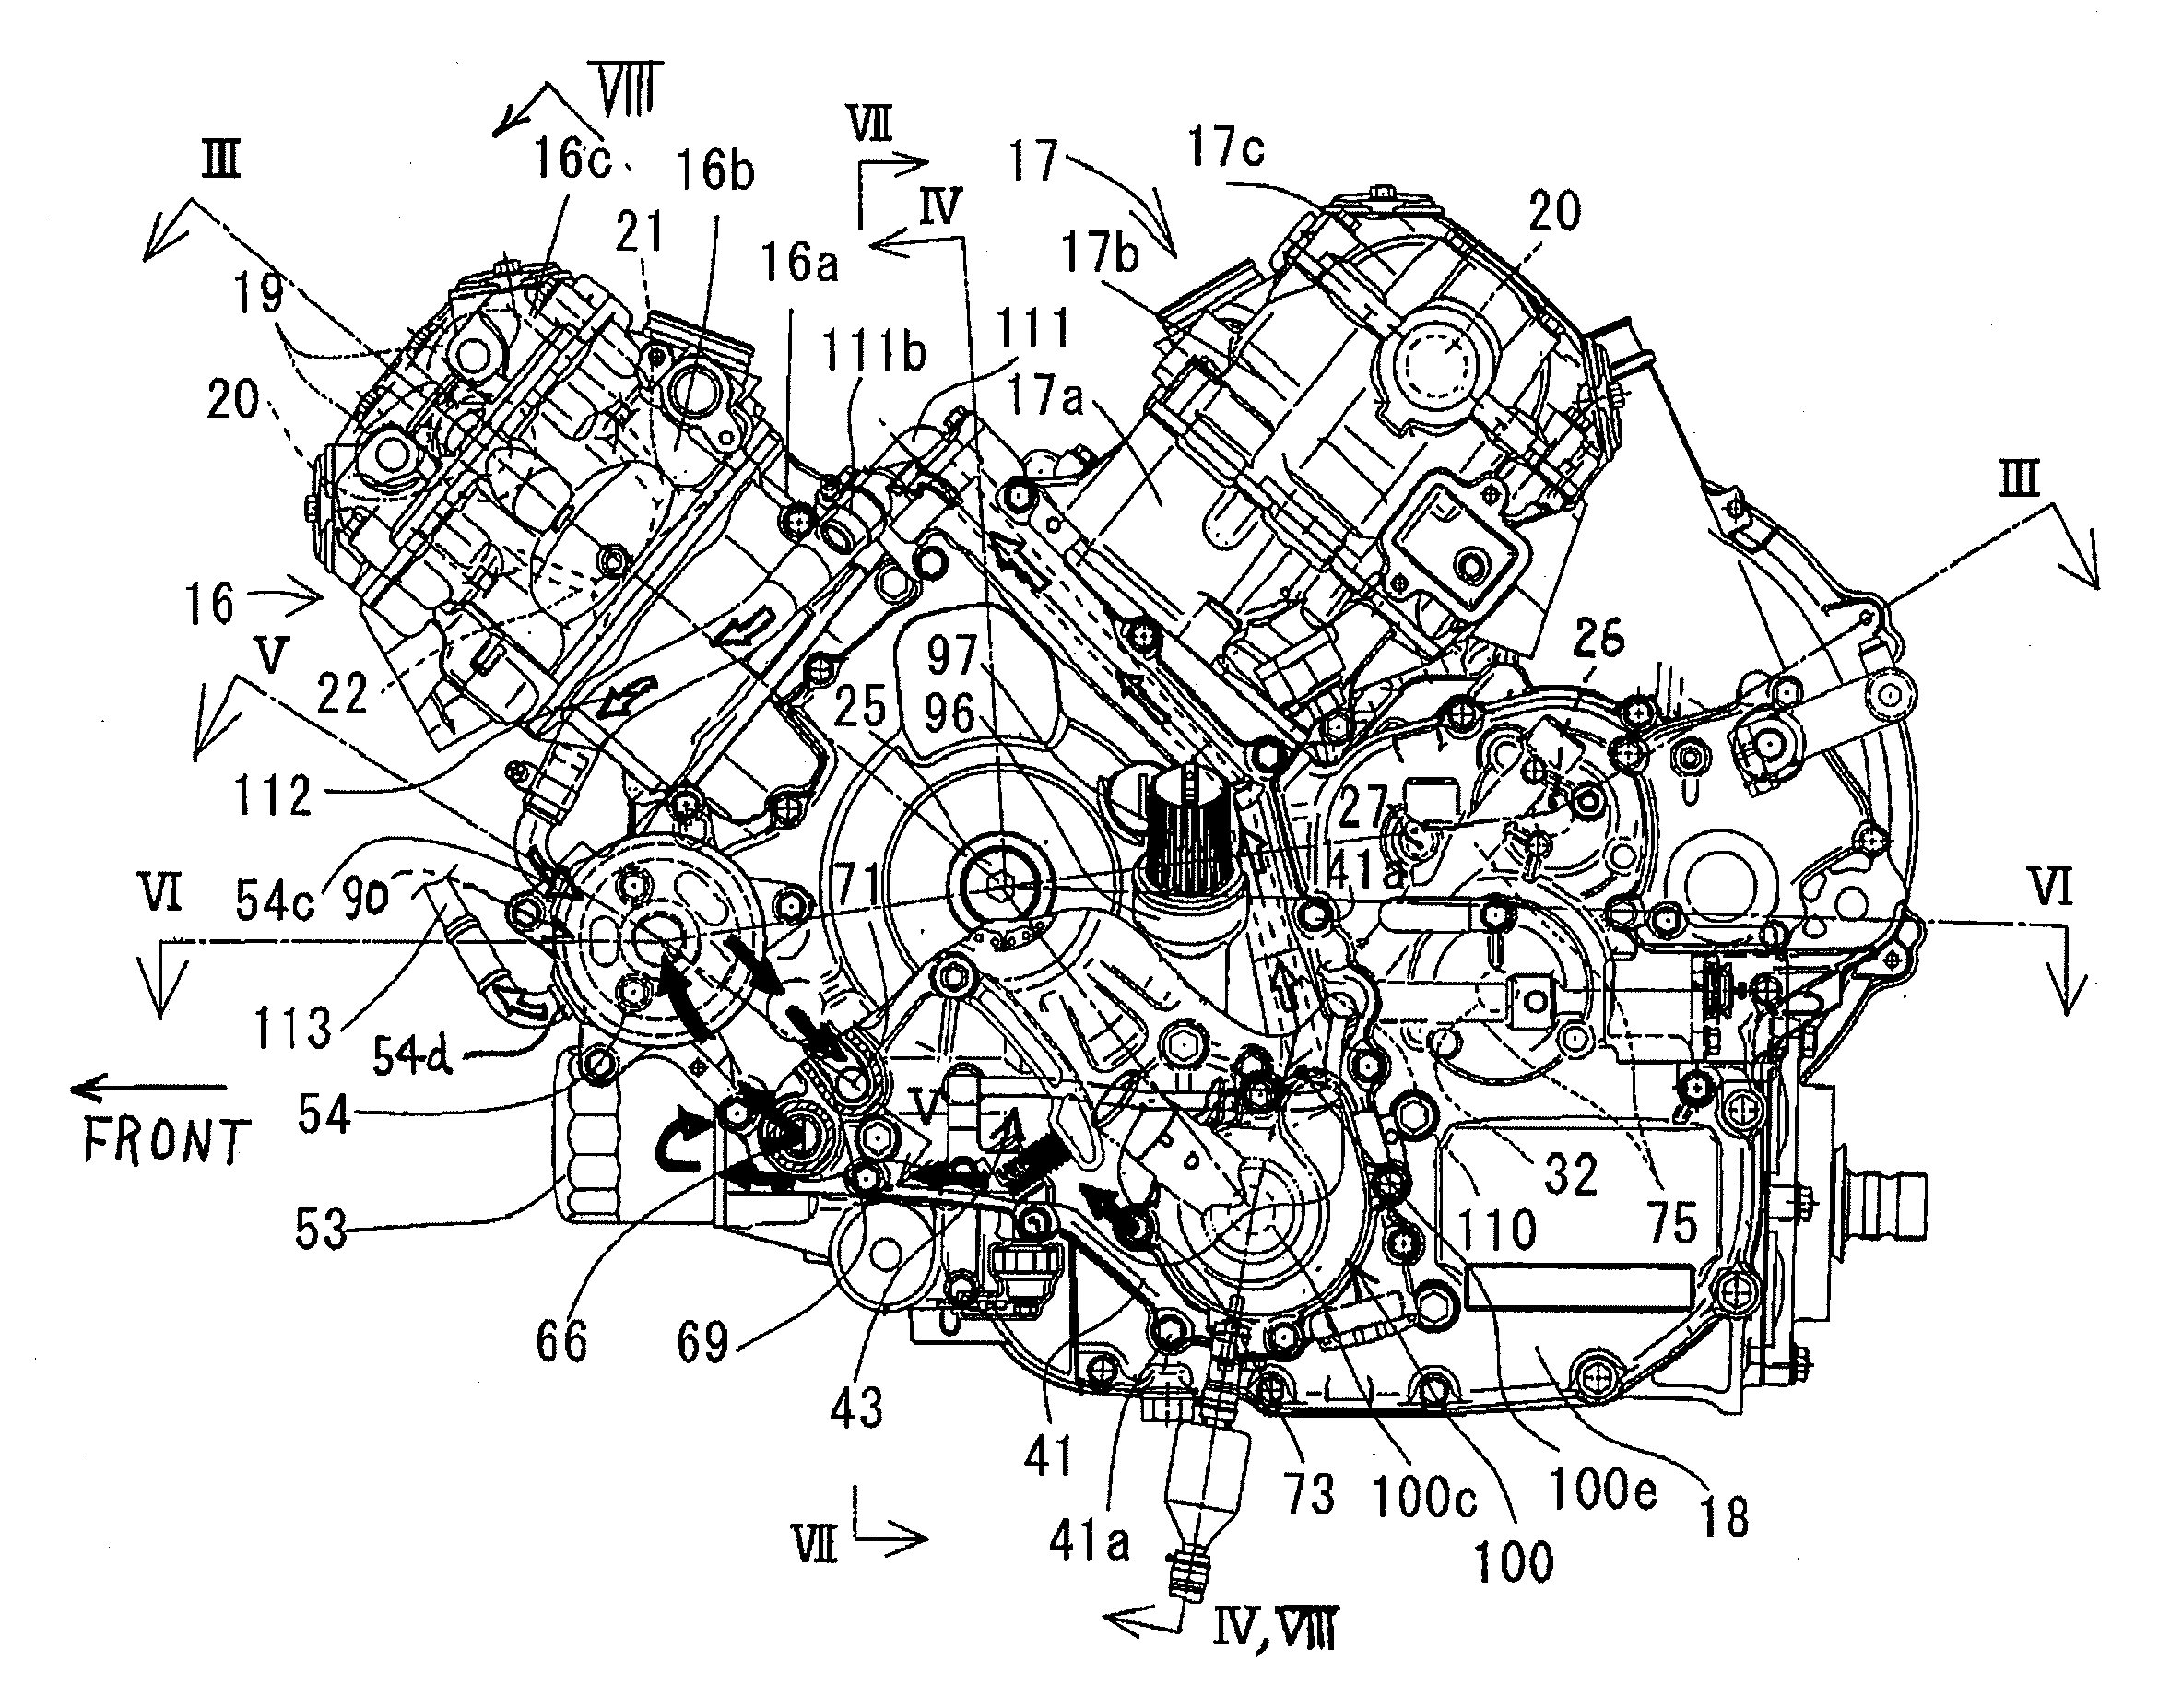 Lubricating oil feeding structure of engine